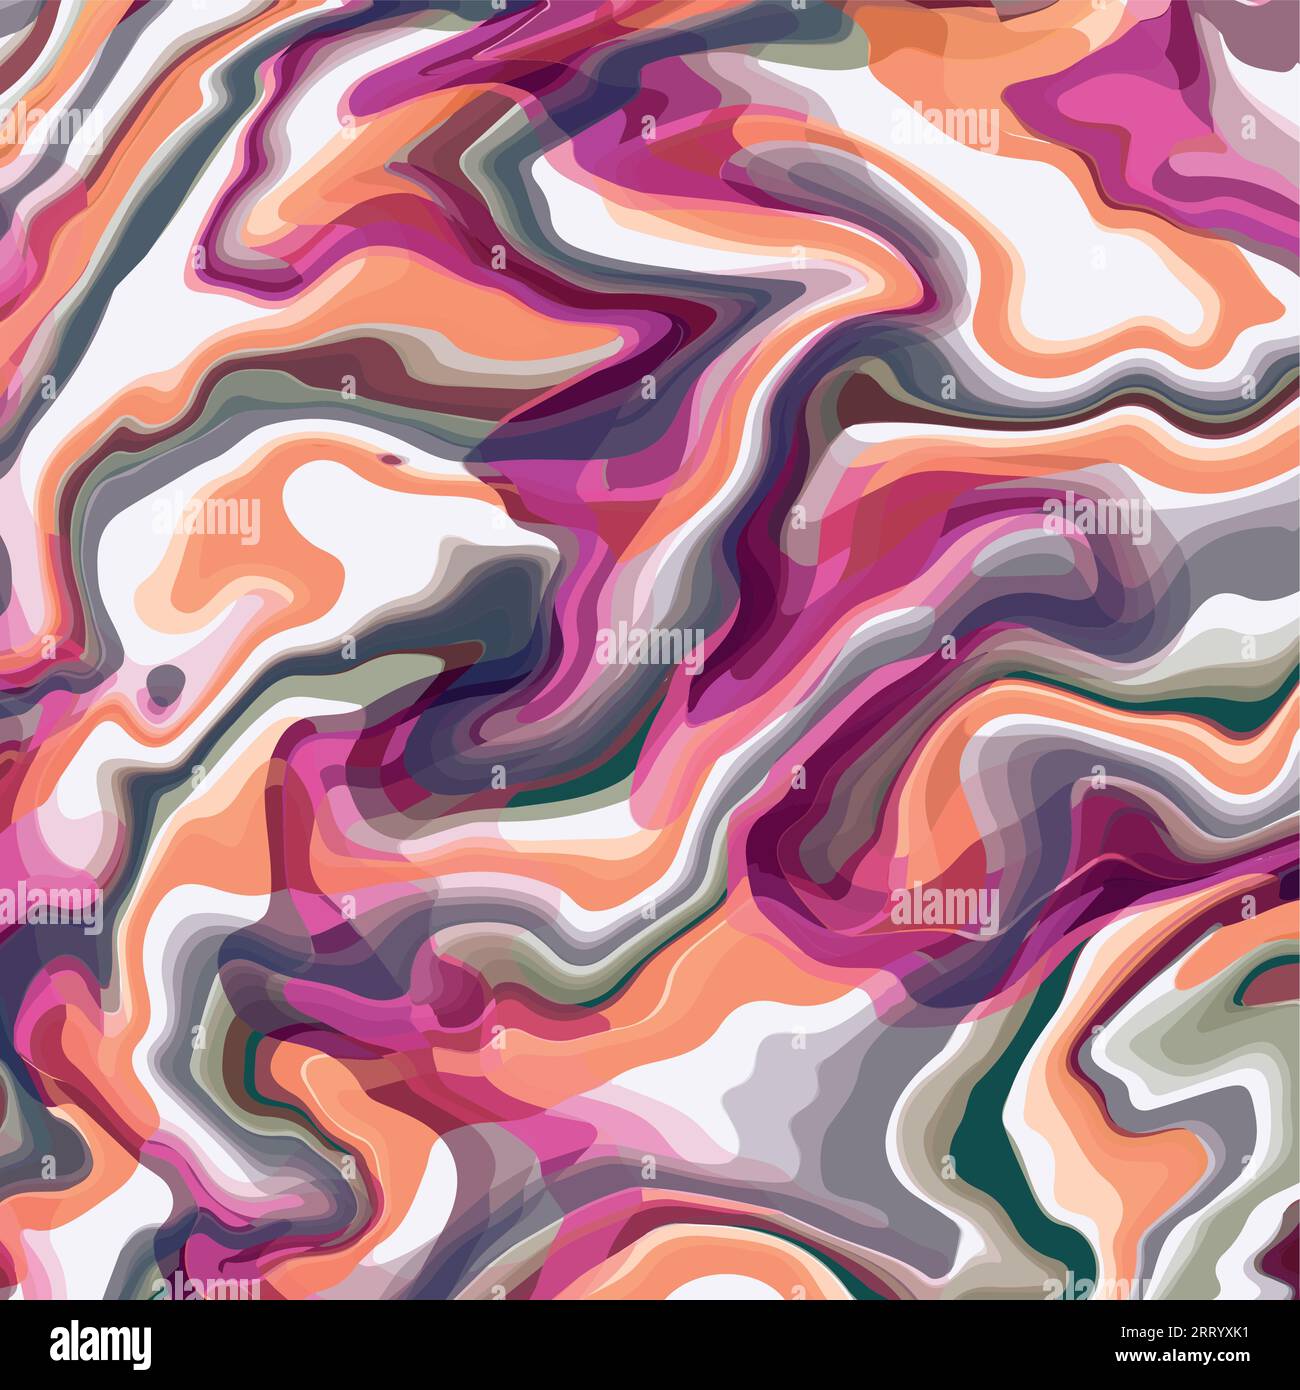 Modern colorful liquid wave background vector. wallpaper, marbling effect, vector illustration, fashion, interior Stock Vector